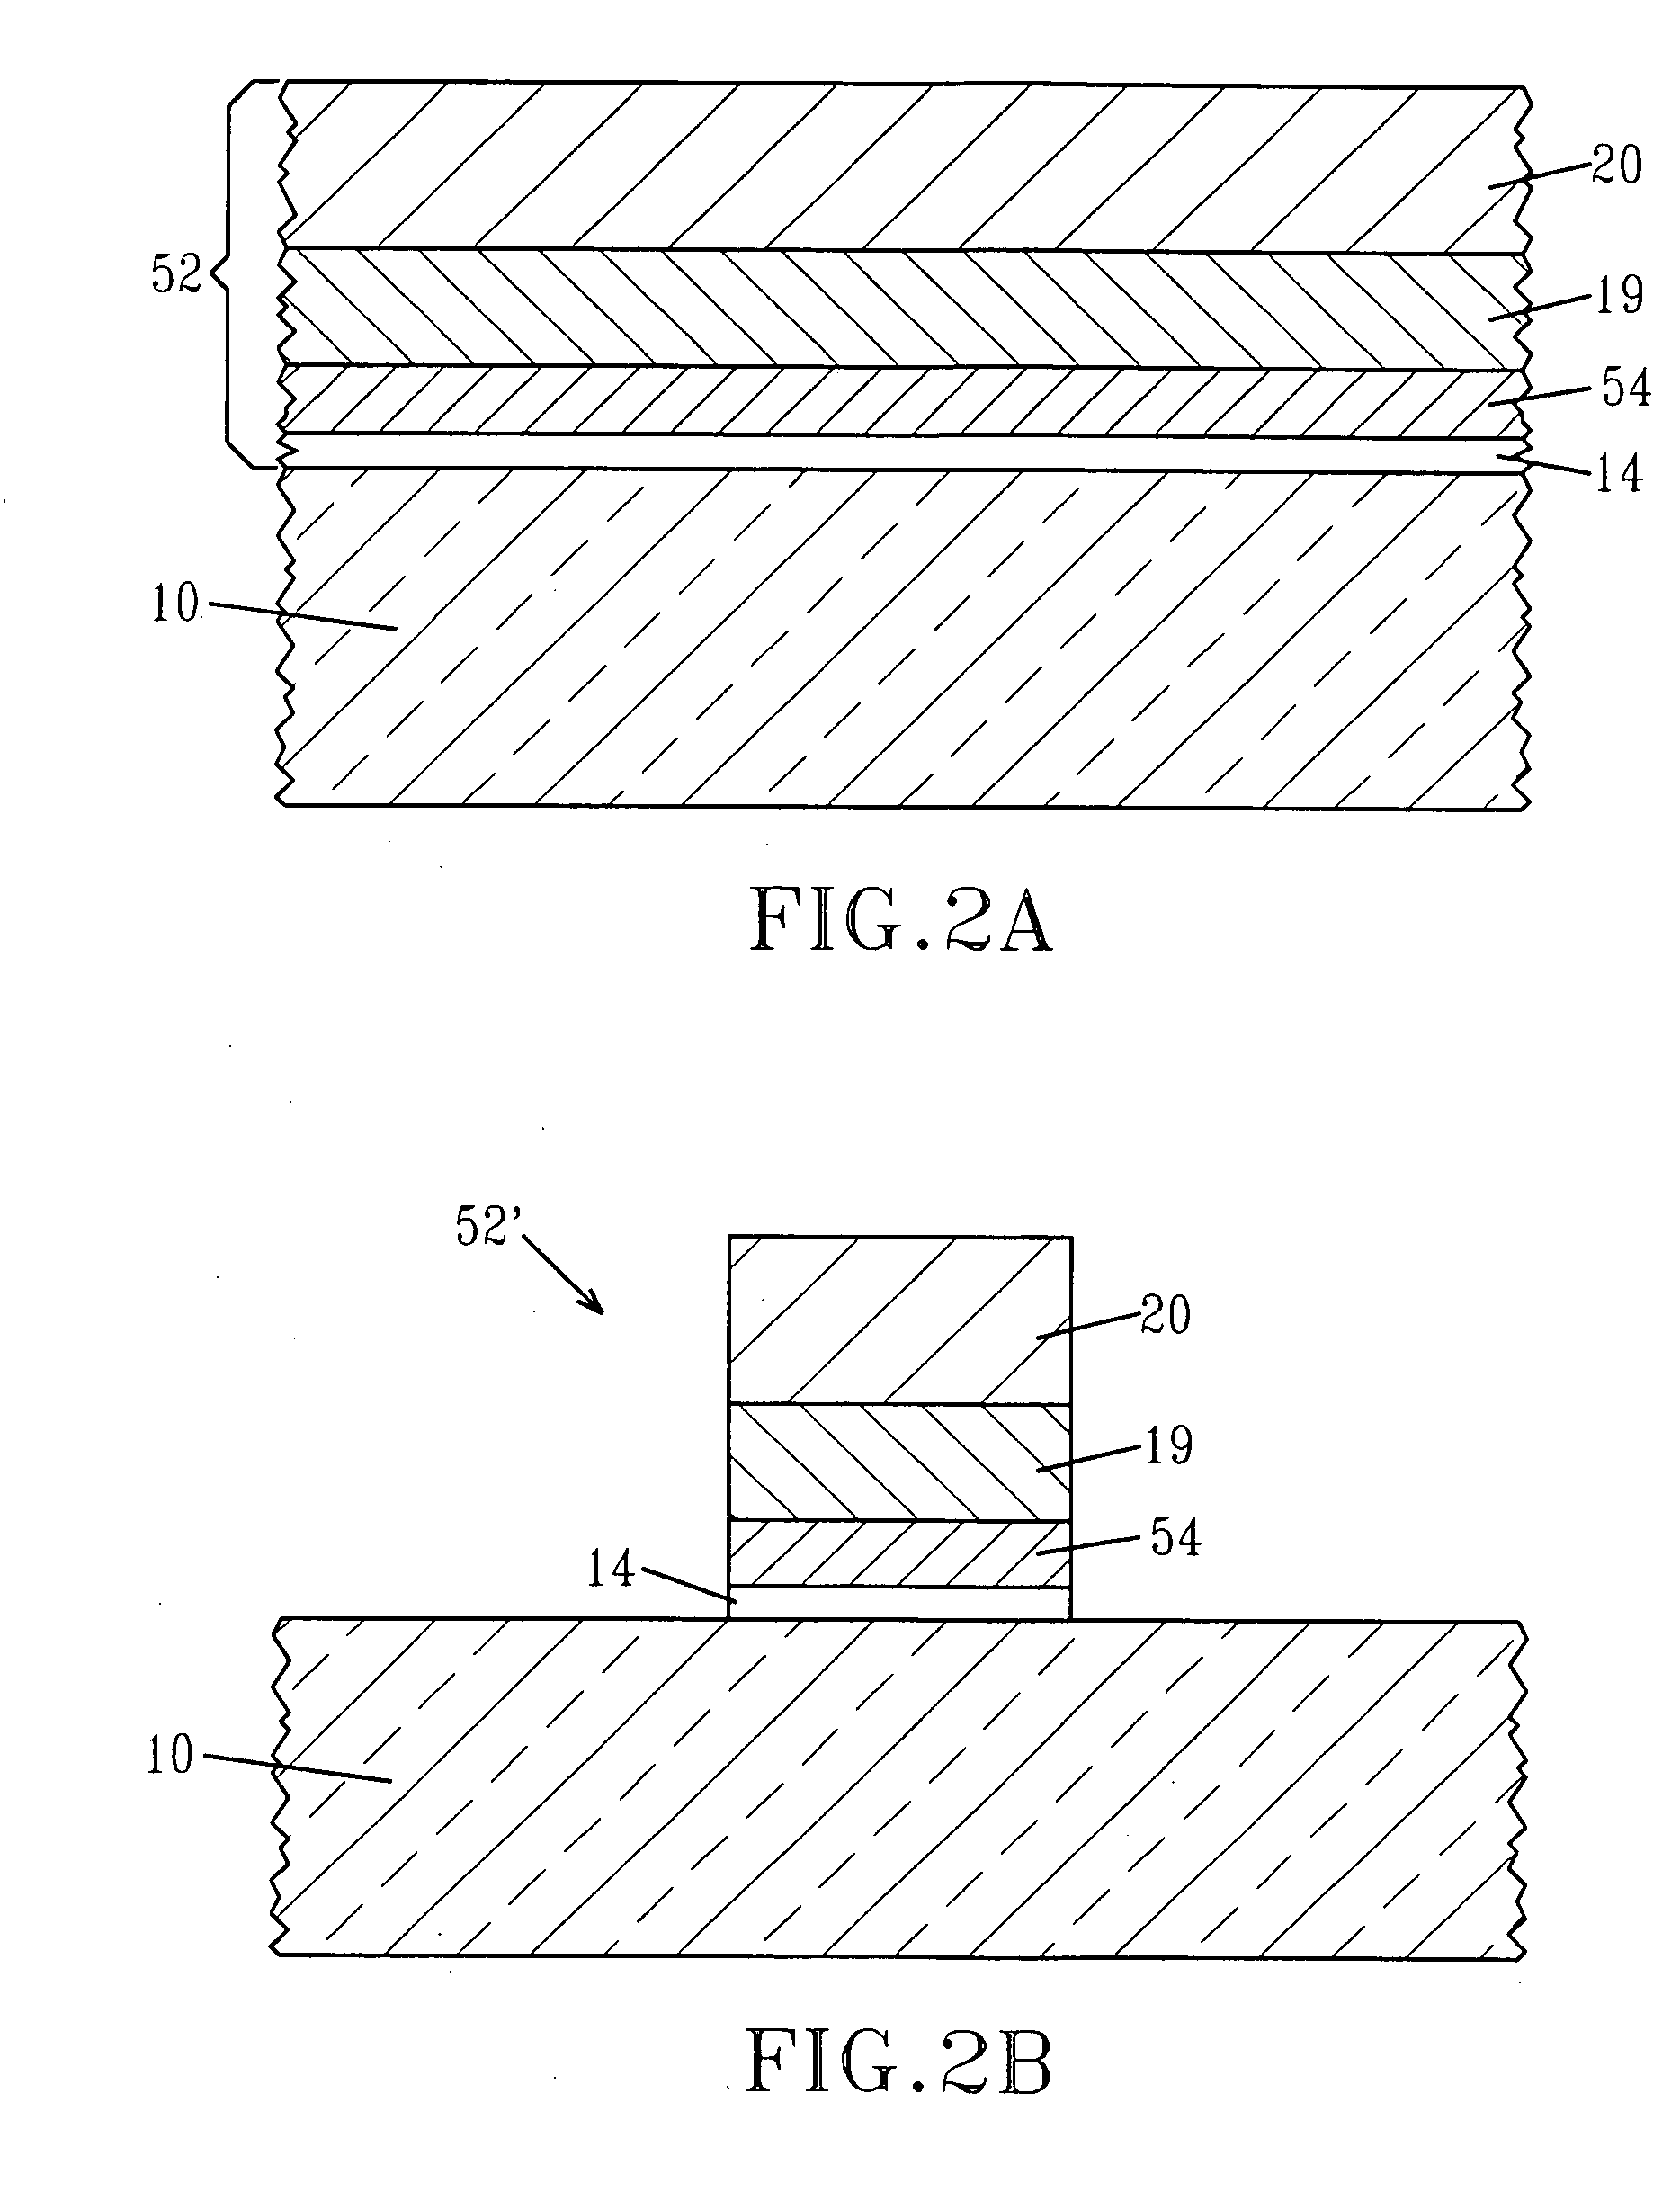 Using metal/metal nitride bilayers as gate electrodes in self-aligned aggressively scaled CMOS devices